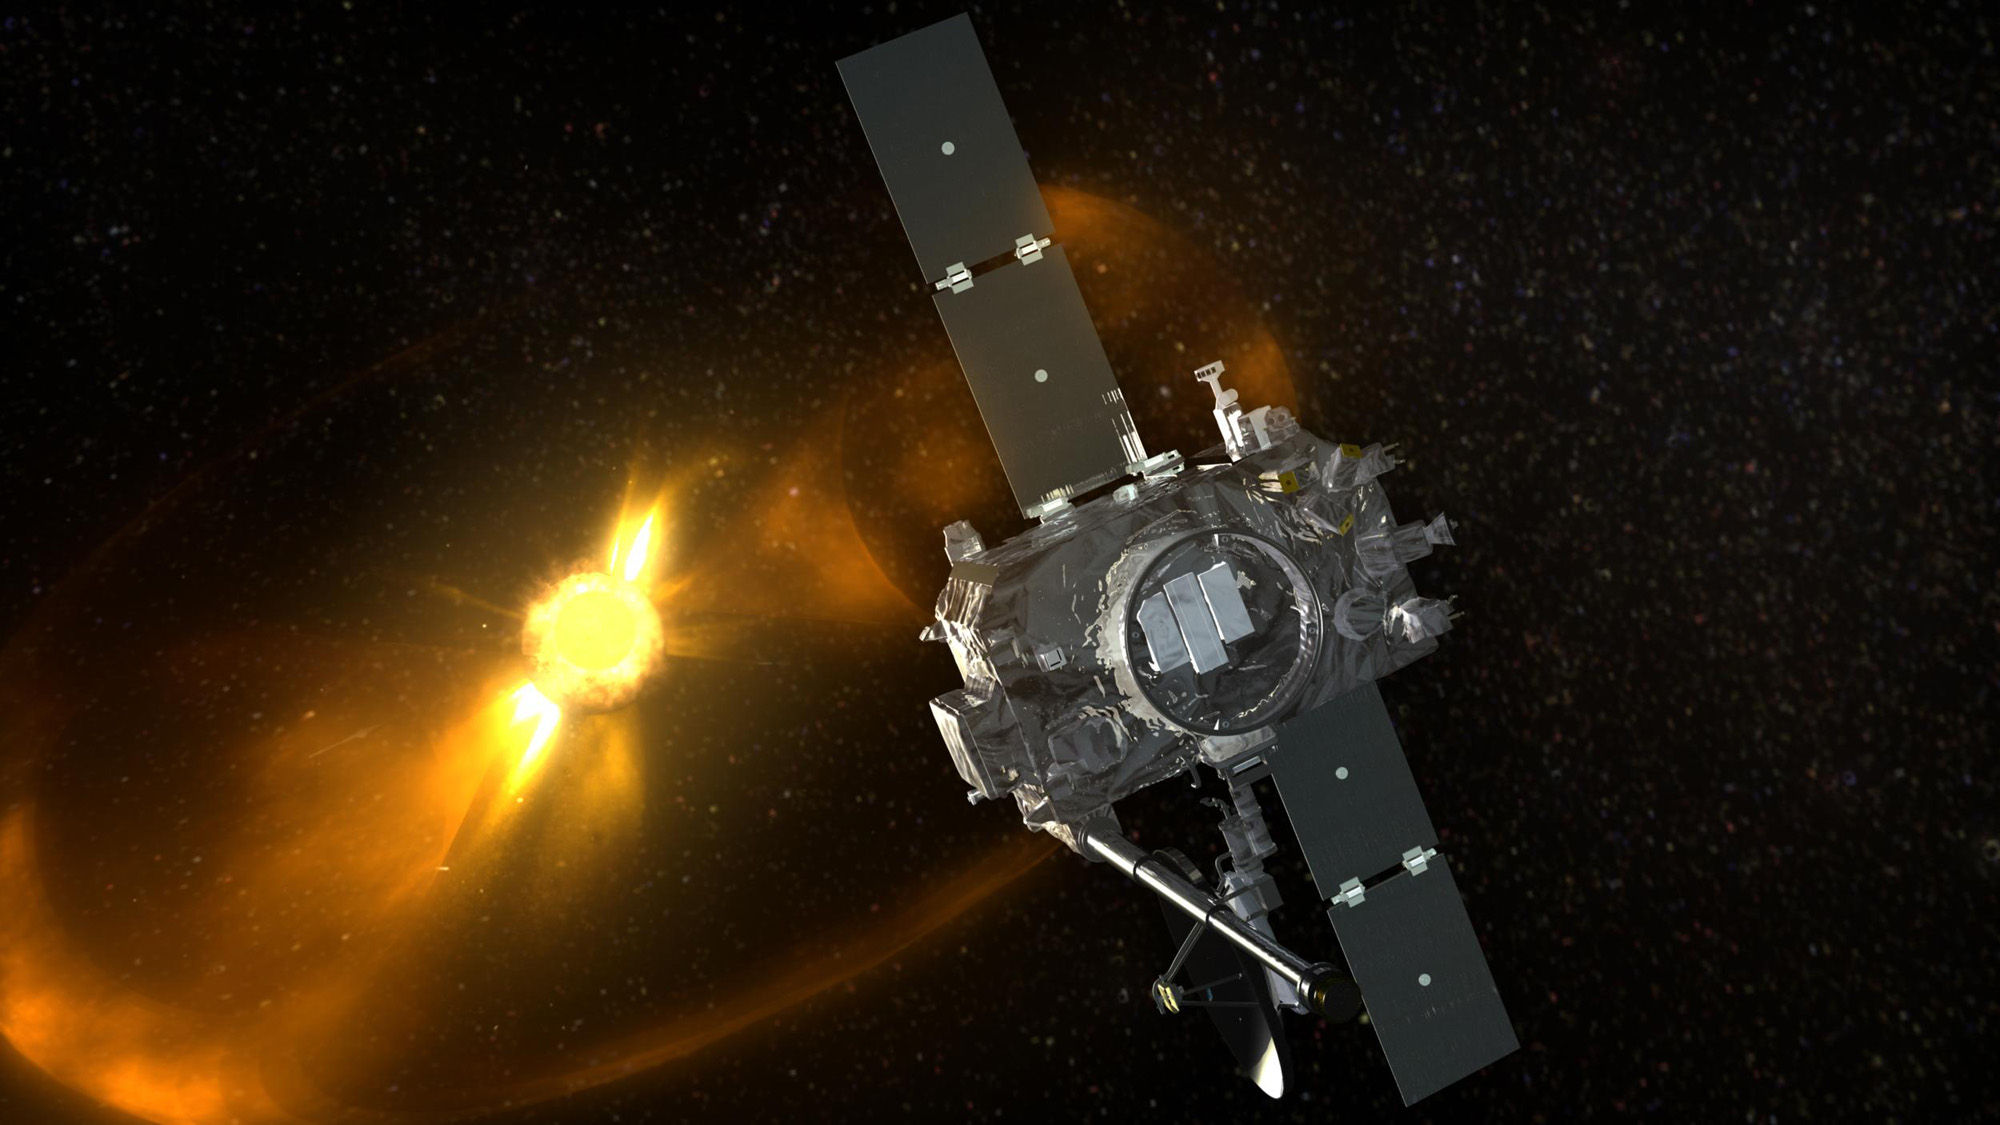 Image: NASA now allowing scientists to use nuclear power sources for future space missions